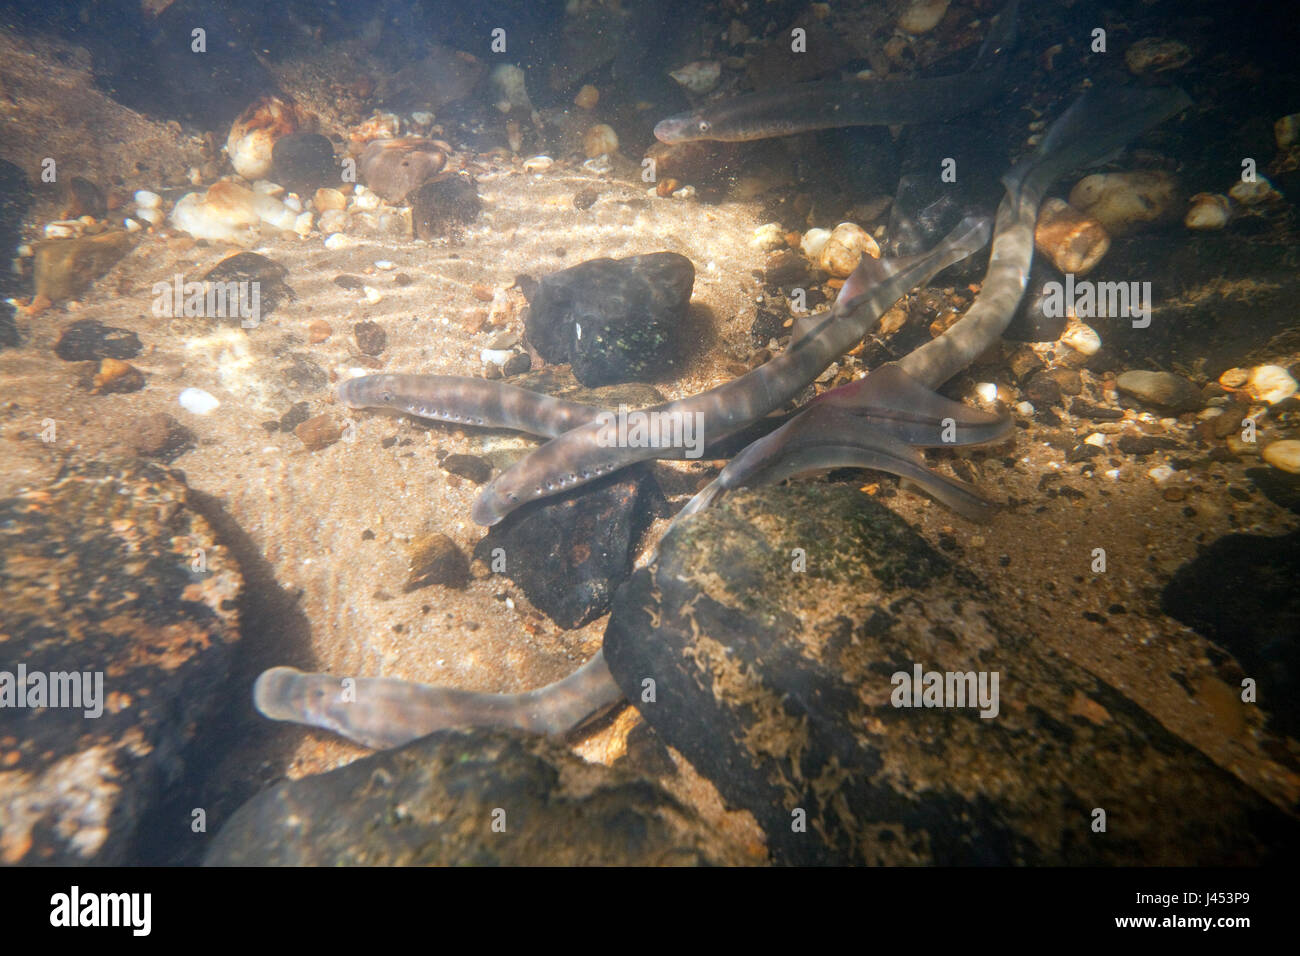 two river lampreys on a spawning site in the Netherlands, the males make nestholes between the rocks were the females can lay their eggs. Stock Photo